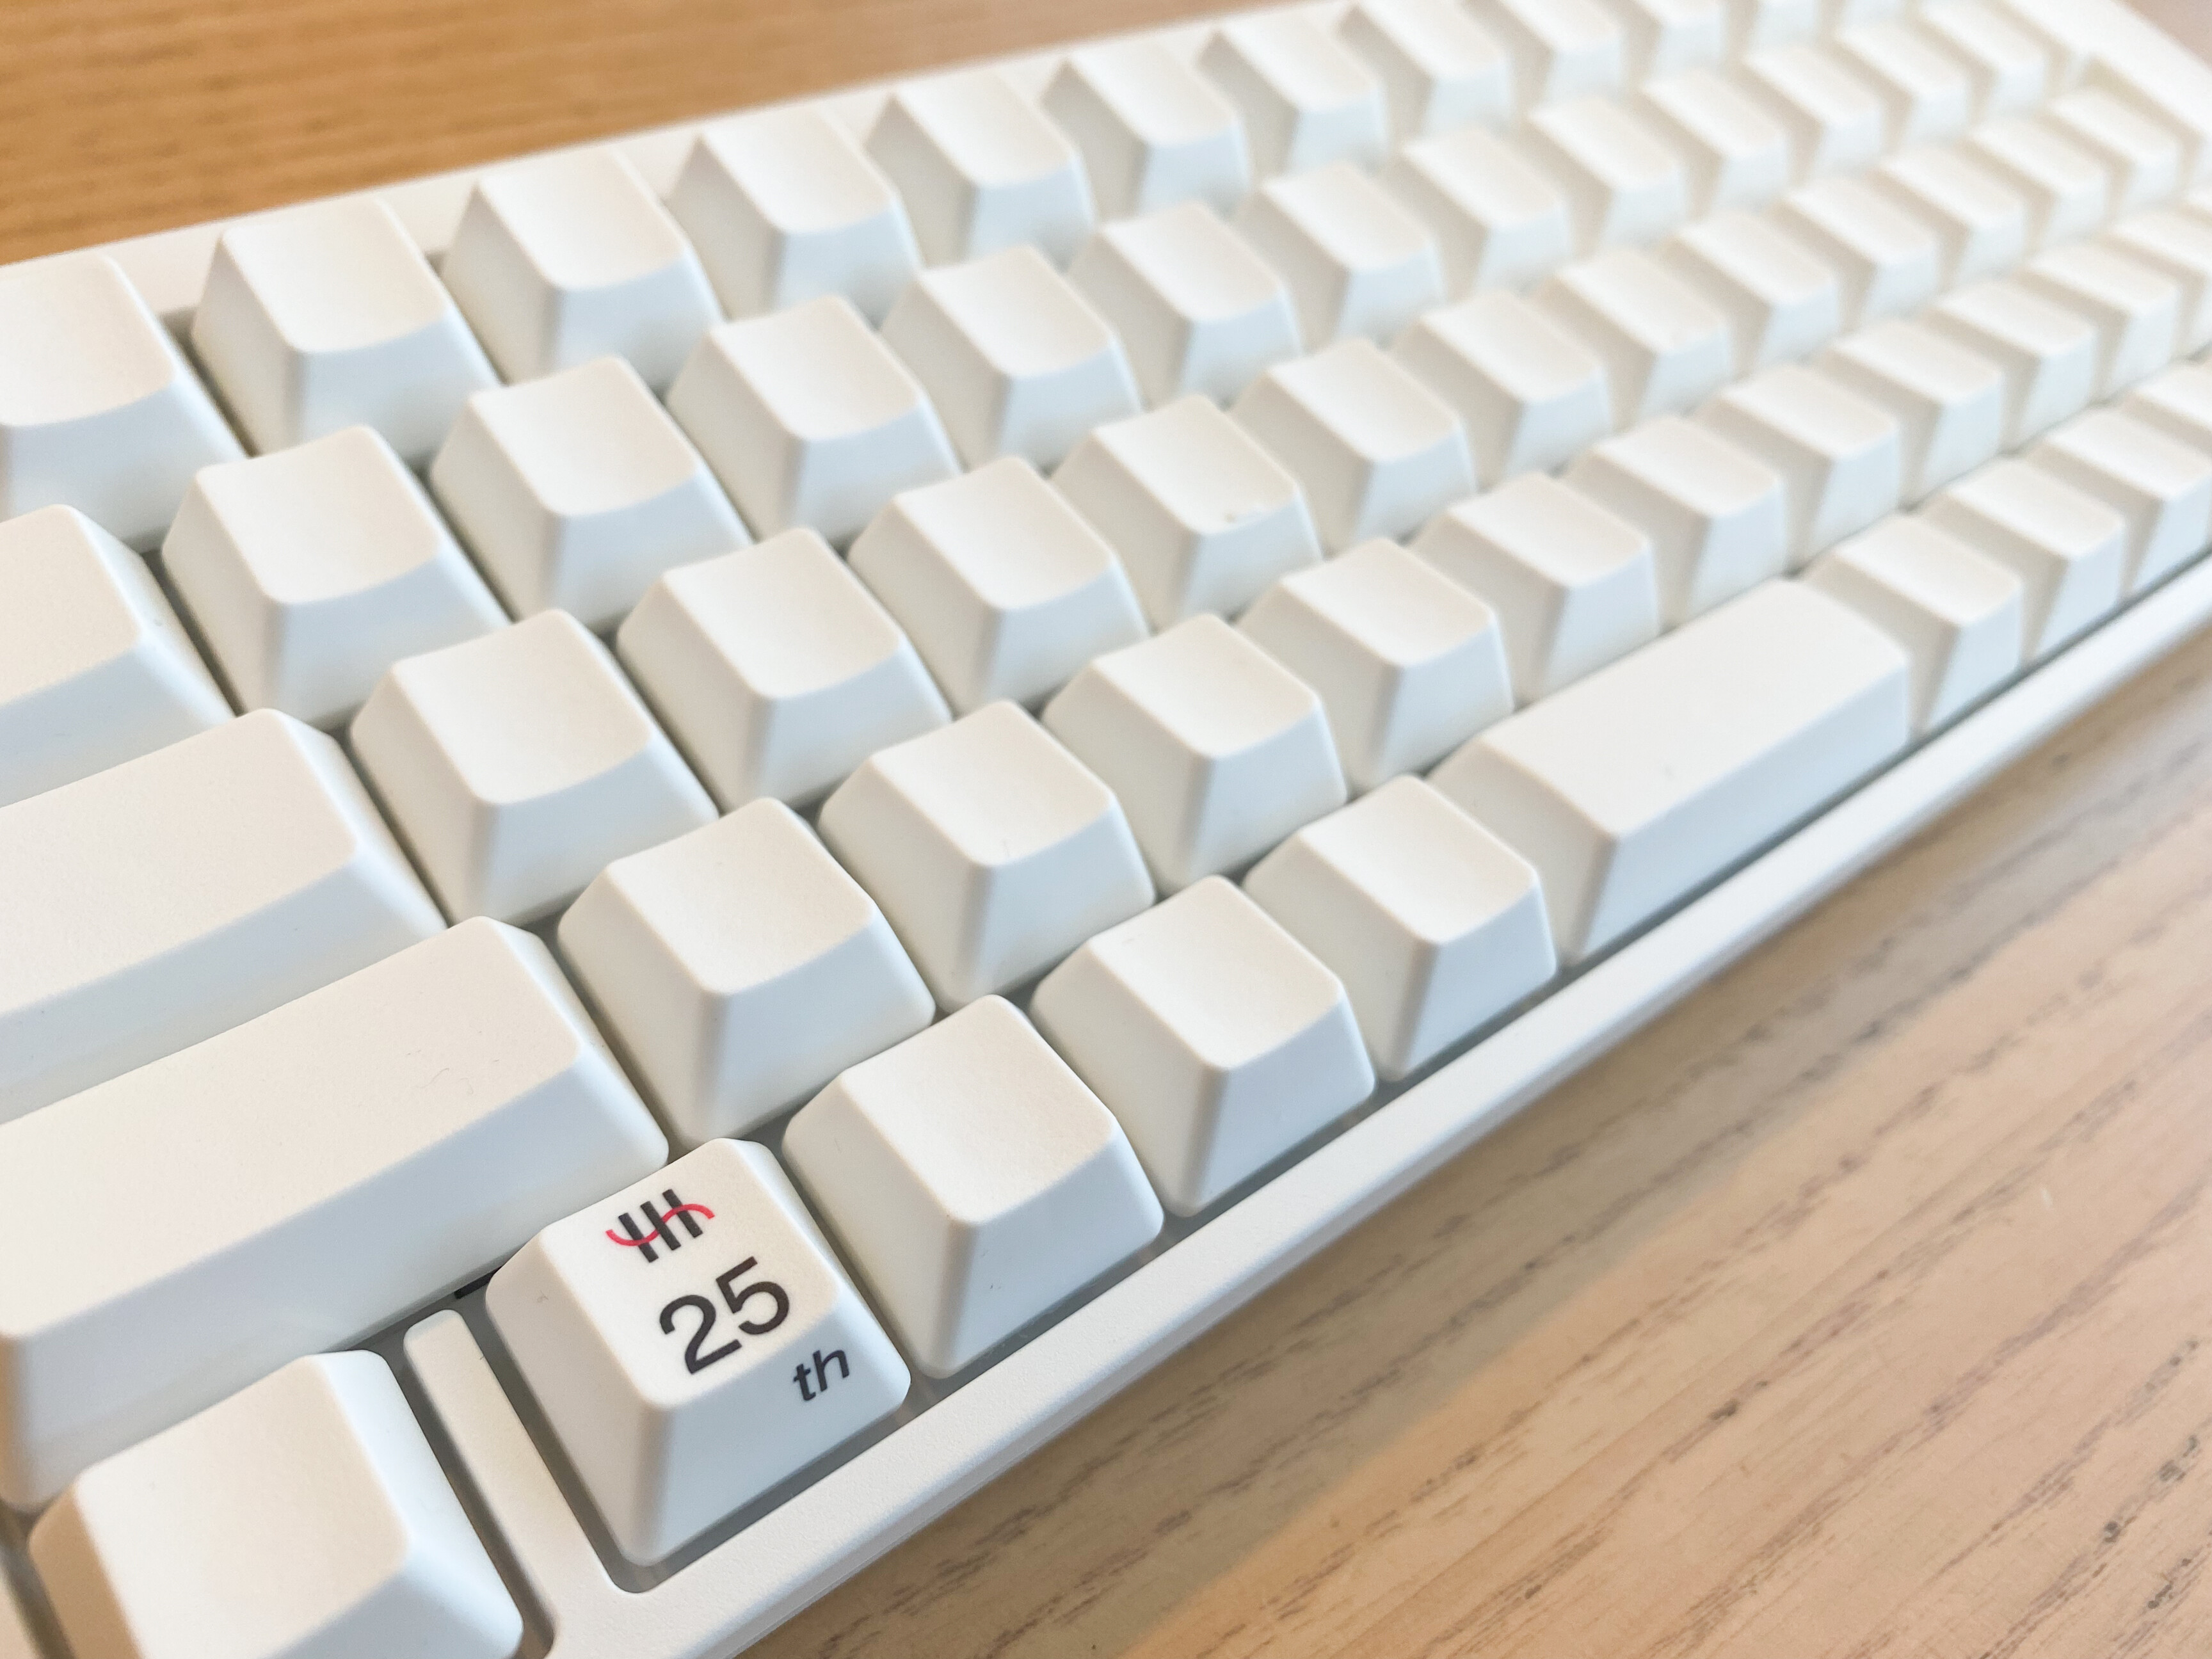 HHKB 生誕25周年特別記念モデル「Type-S 雪」＆「無刻印キートップ 